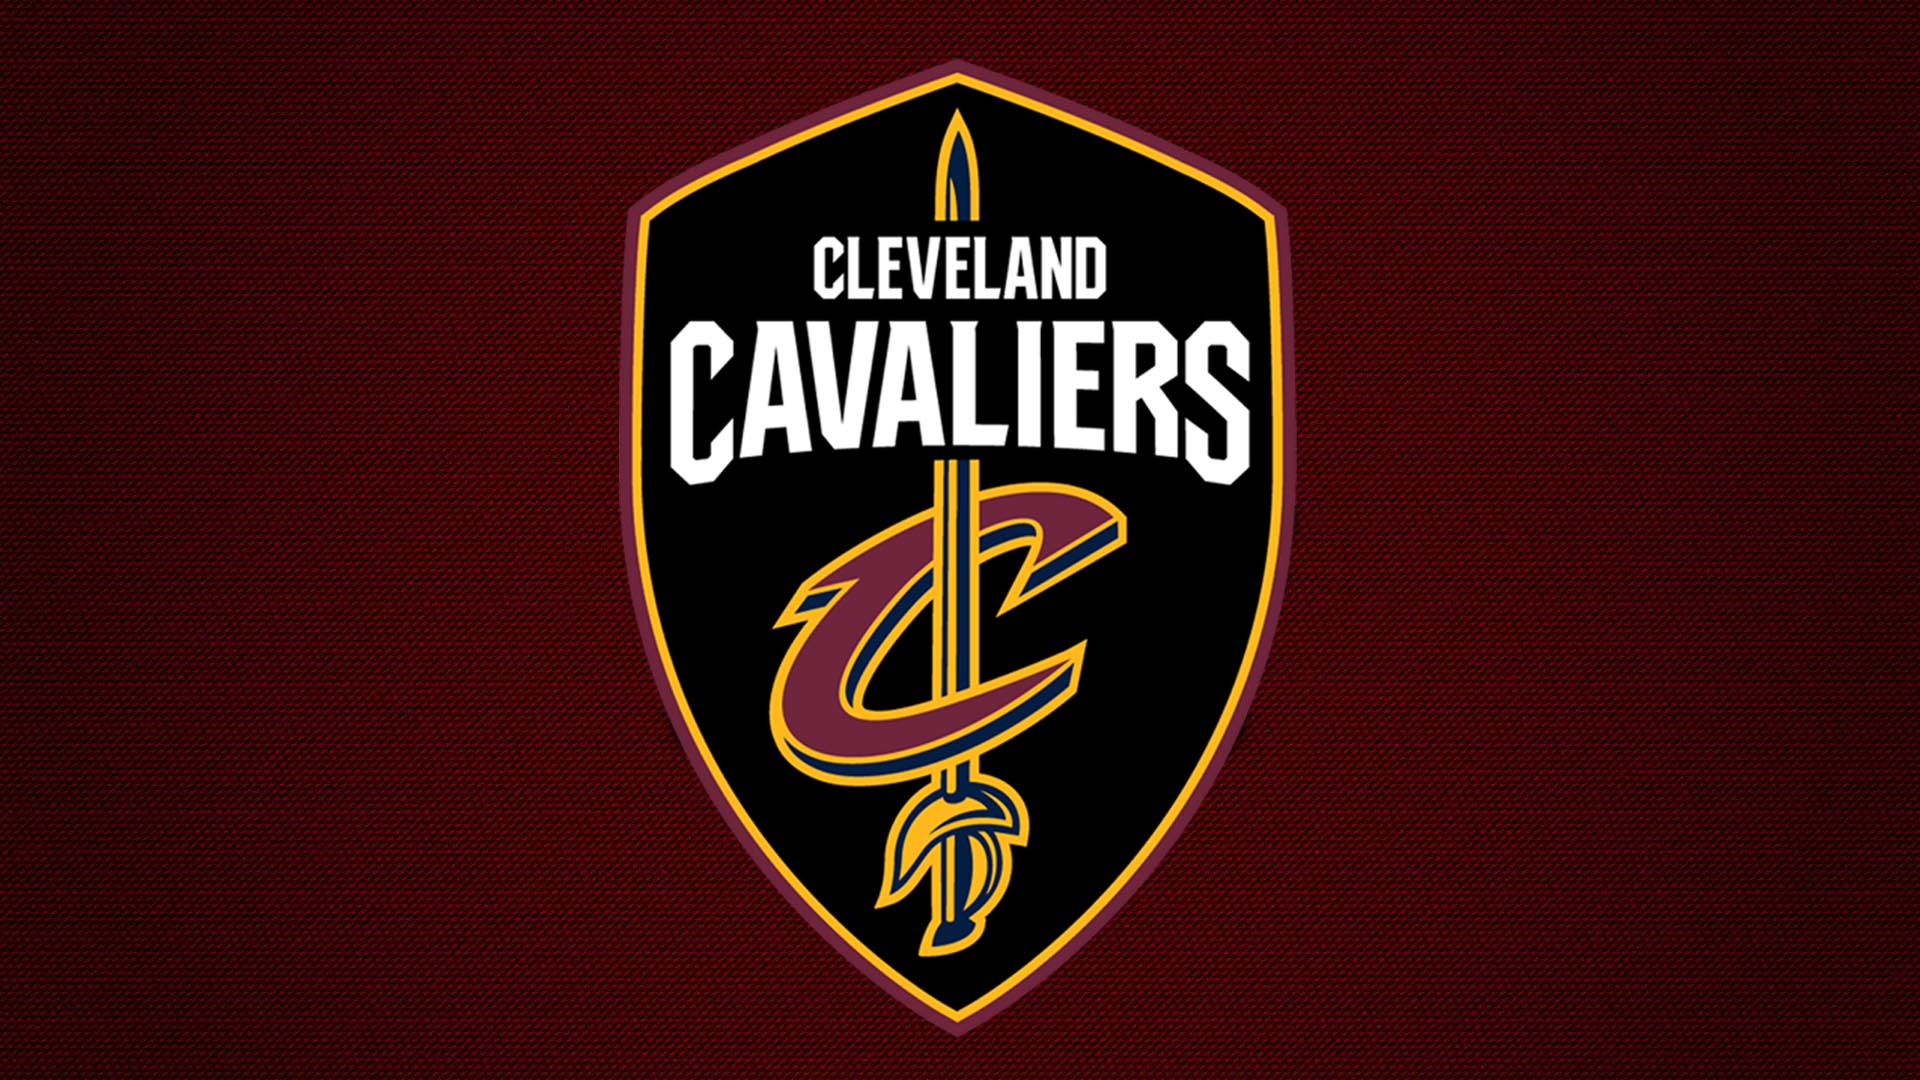 Wallpapers HD Cleveland Cavaliers Logo 1920x1080